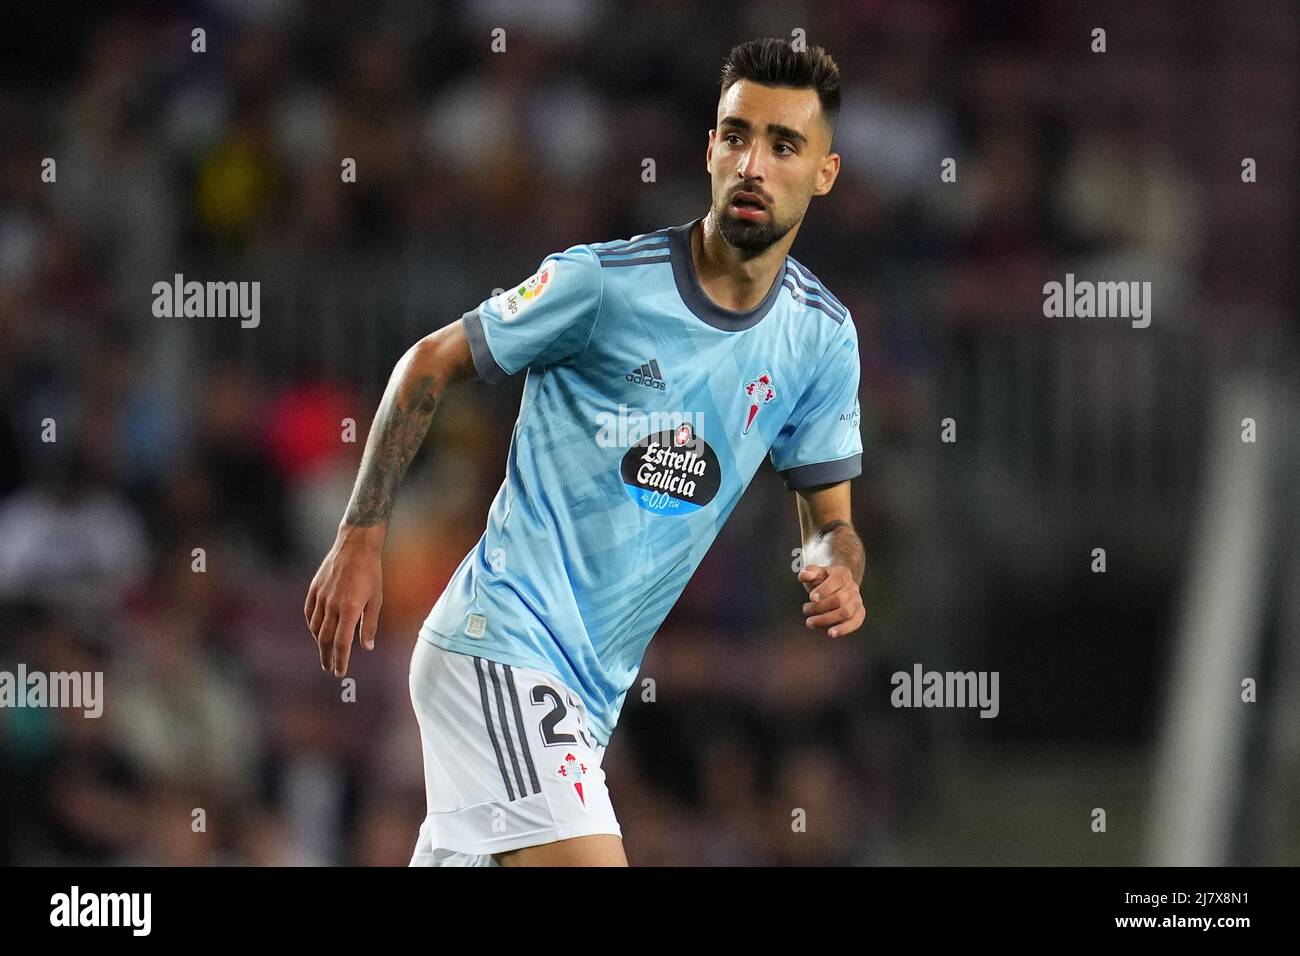 Barcelona, Spain. May 10, 2022, Brais Mendez of RC Celta during the La ...